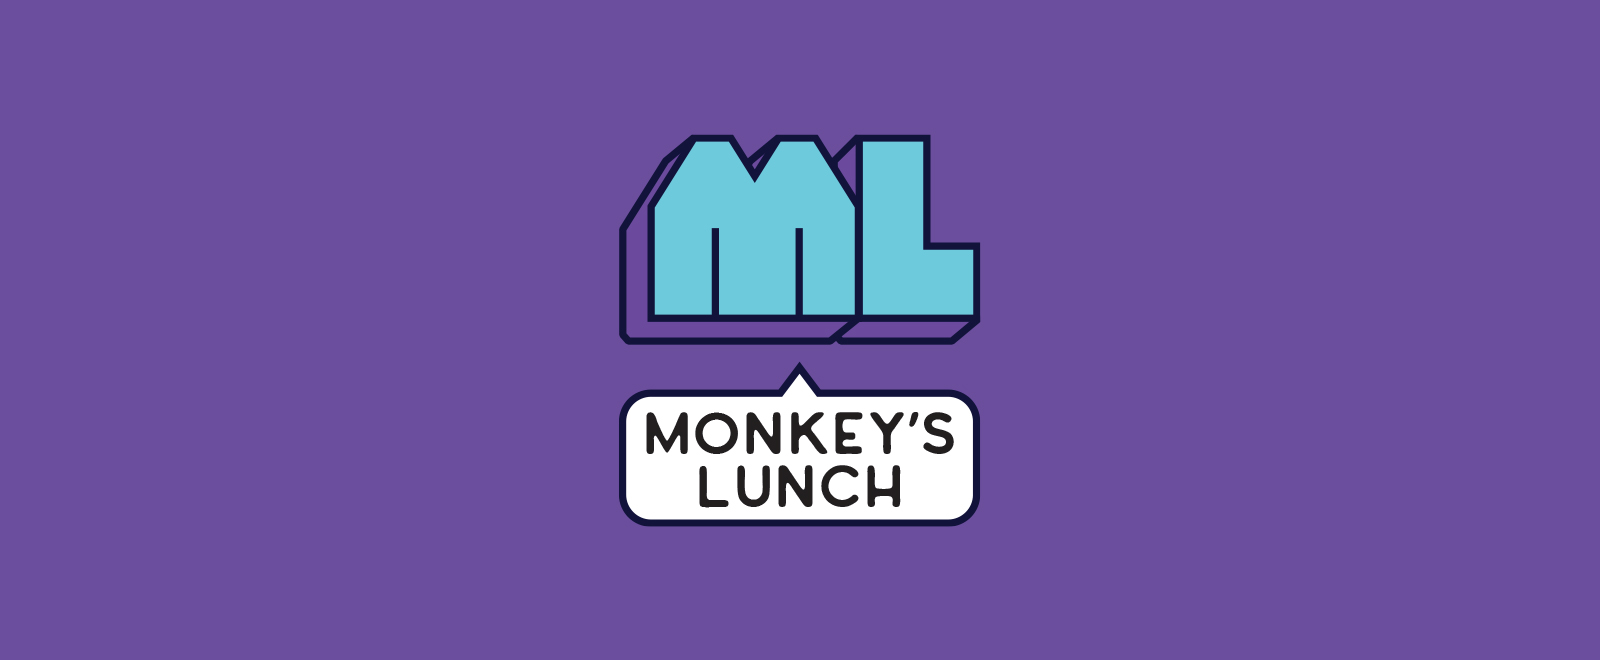 Introducing Monkey's Lunch!